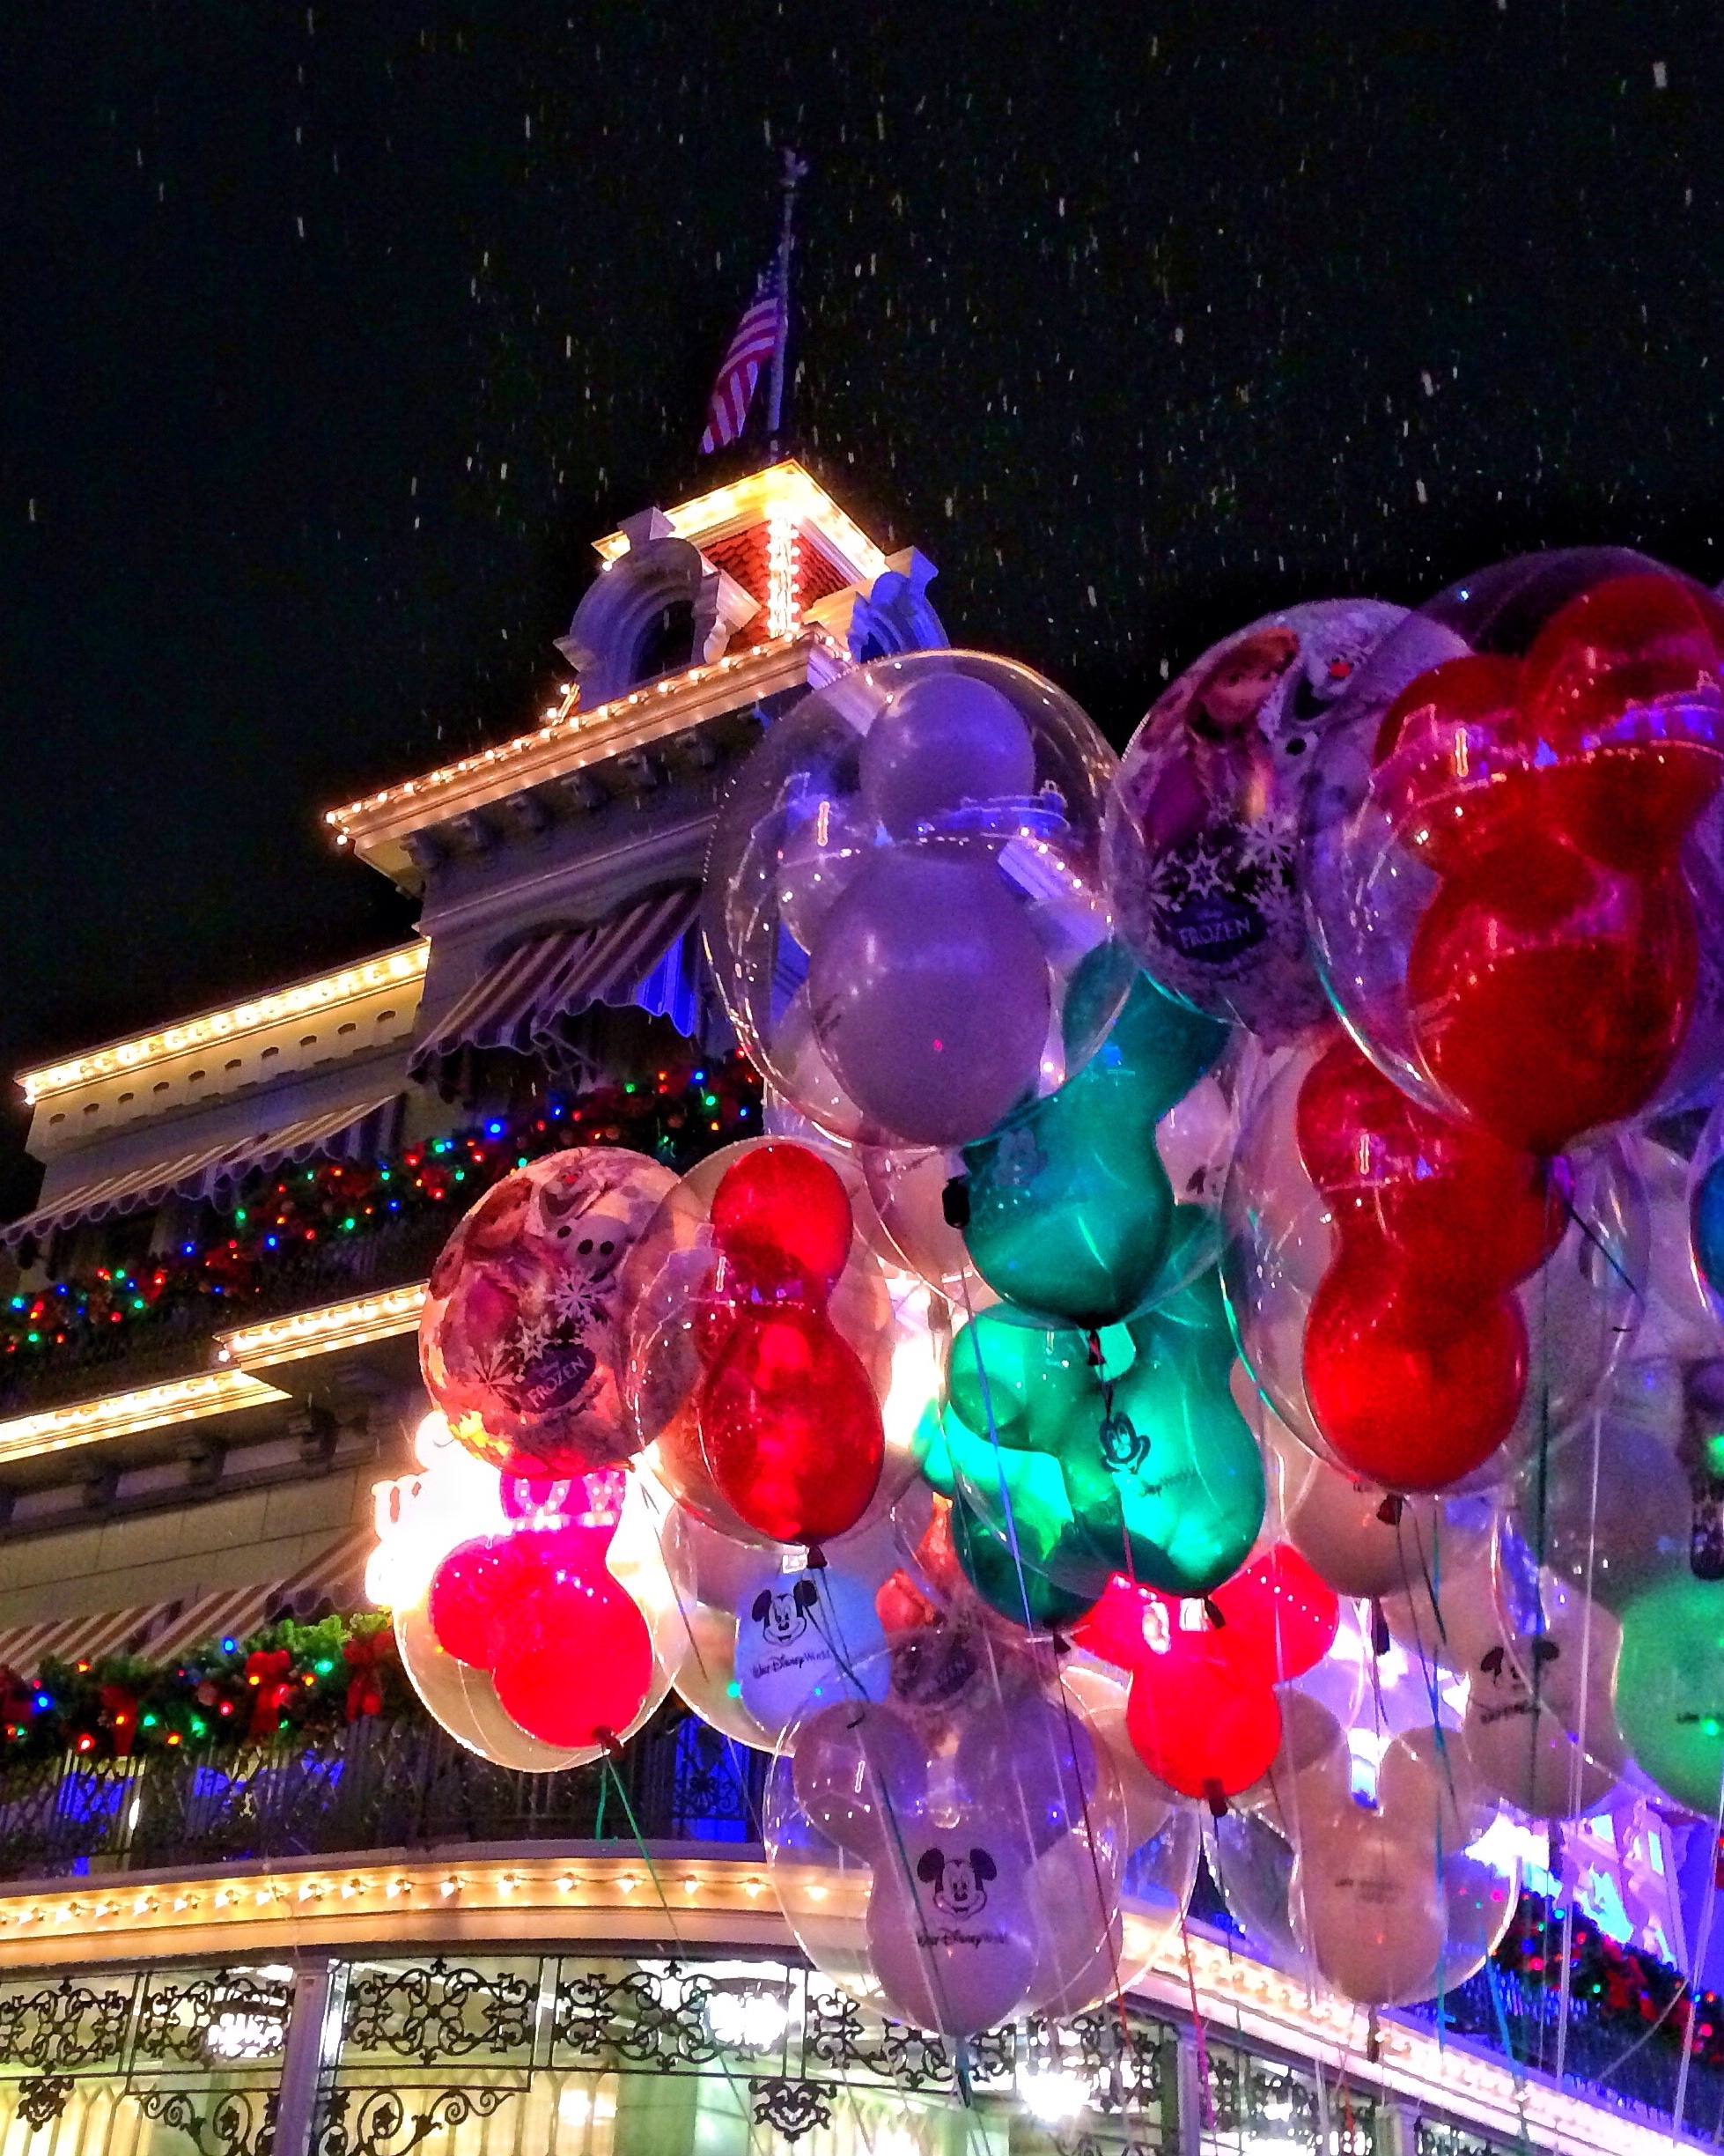 Vegan Guide to Mickey’s Very Merry Christmas Party in the Magic Kingdom at Walt Disney World